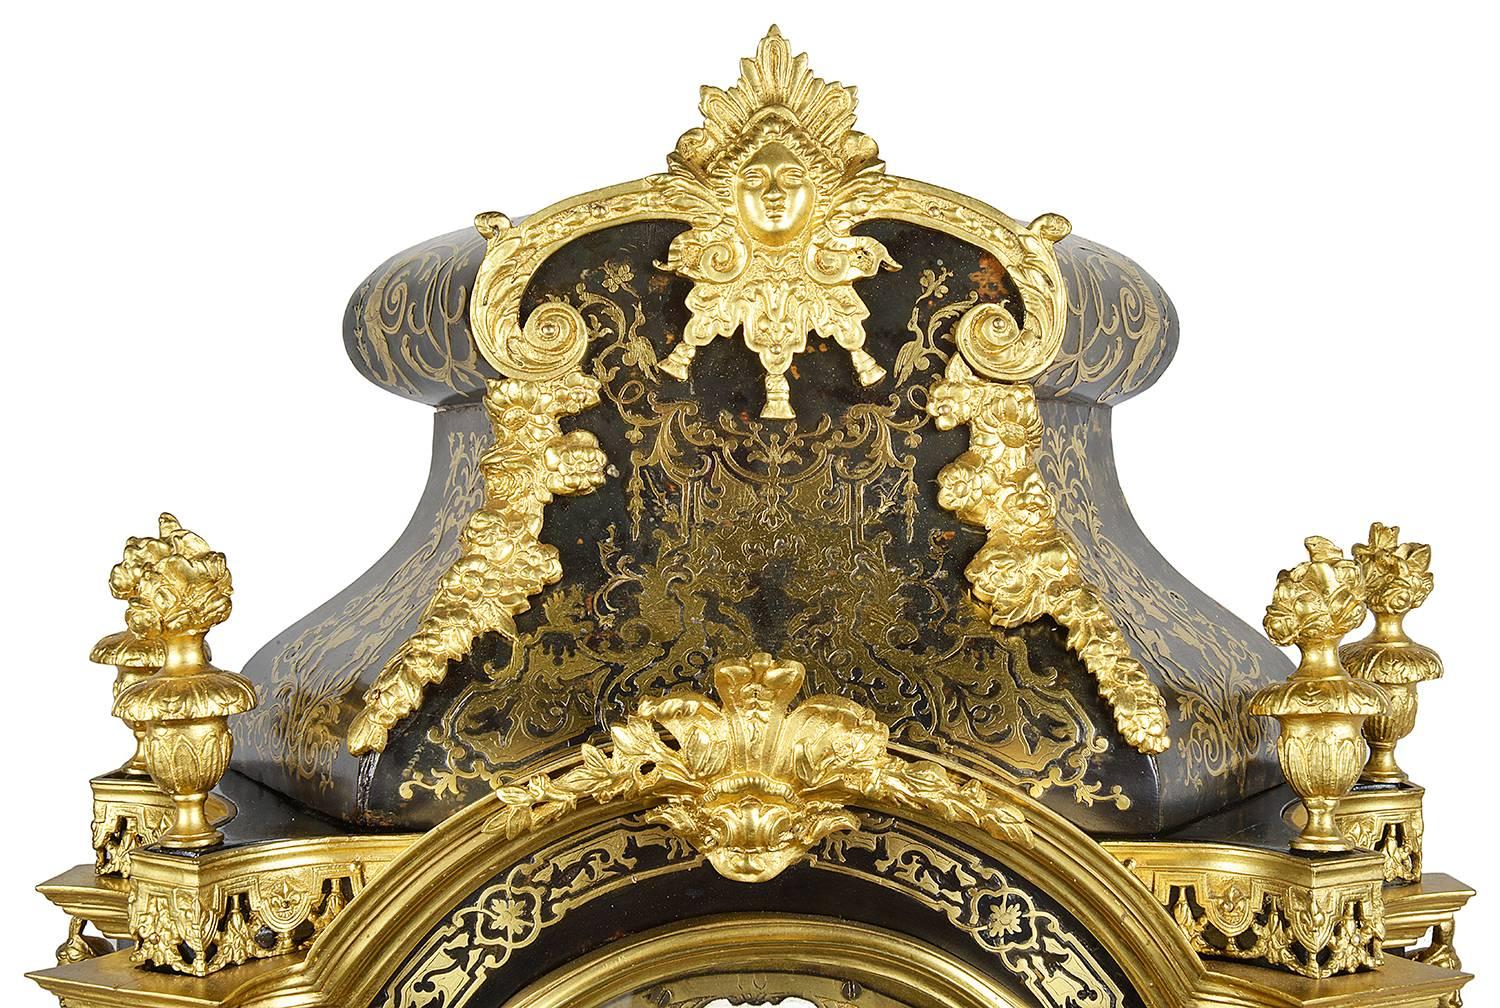 A very impressive late 19th century Boulle inlaid mantel clock. Having scrolling, gilded ormolu mounts, an eight day striking movement with white enamel numerals. Caryatid and Horse mounts to the clock case and raised on a plinth base.